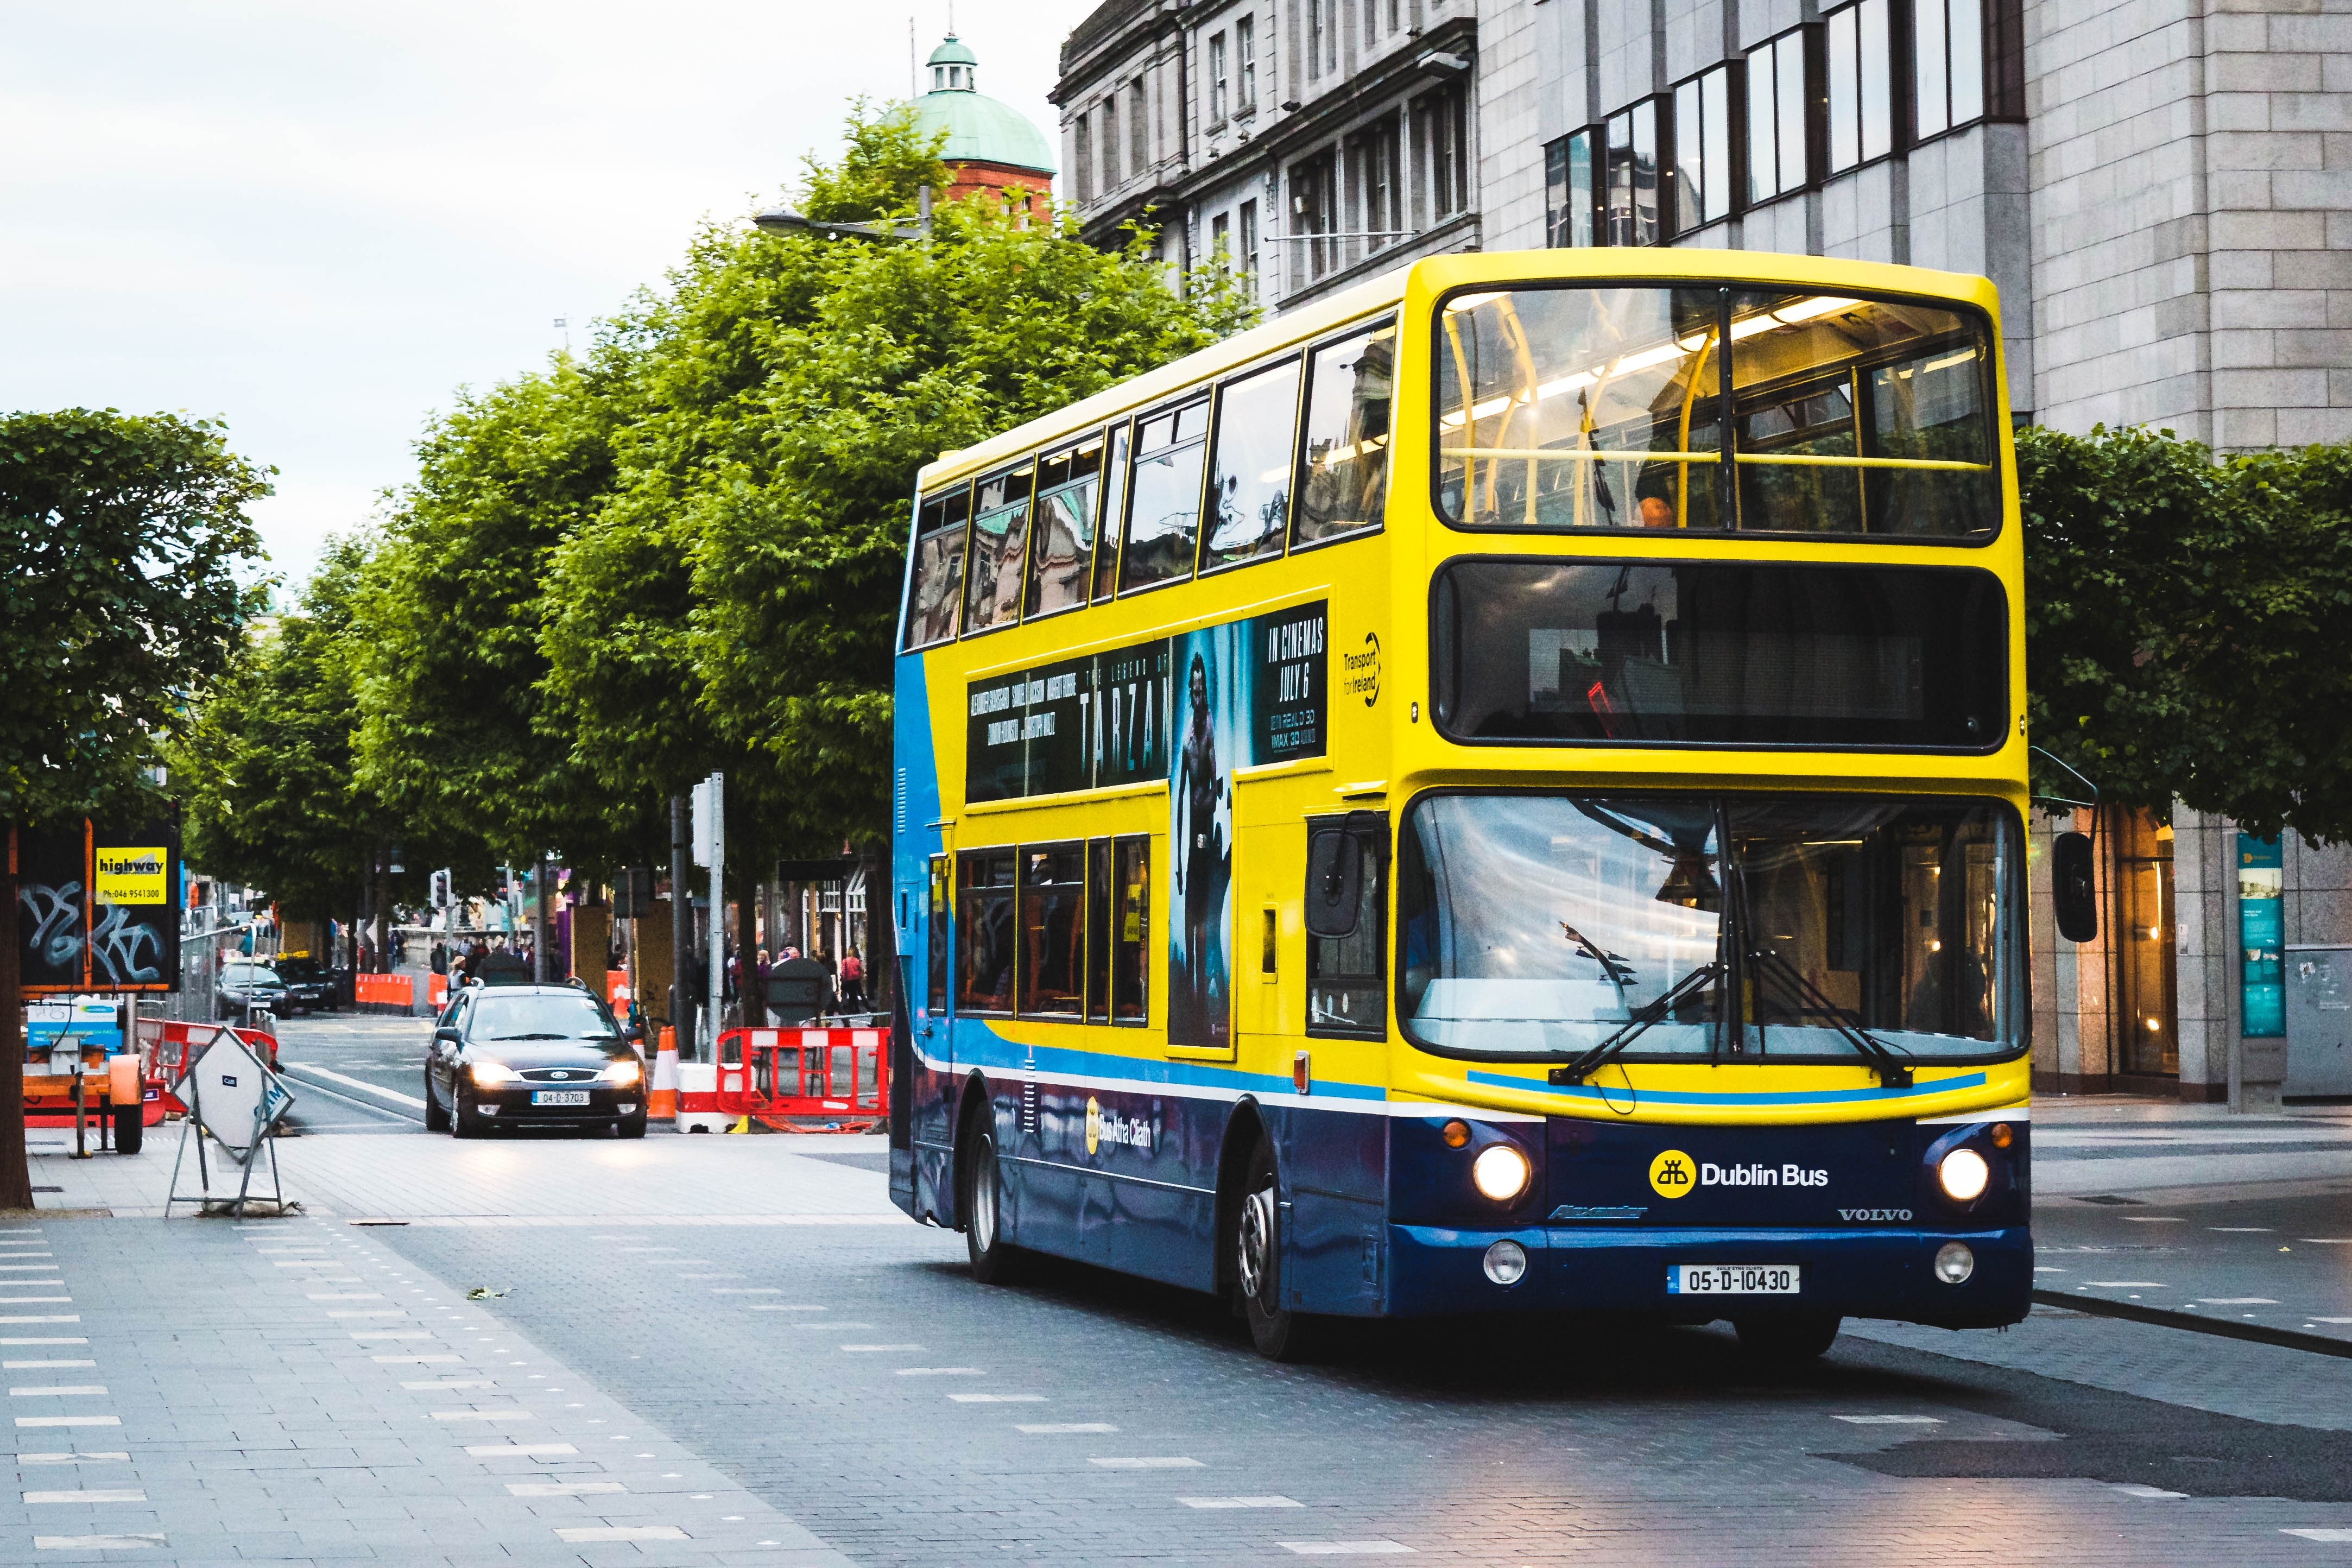 Image of the Dublin Bus in Ireland